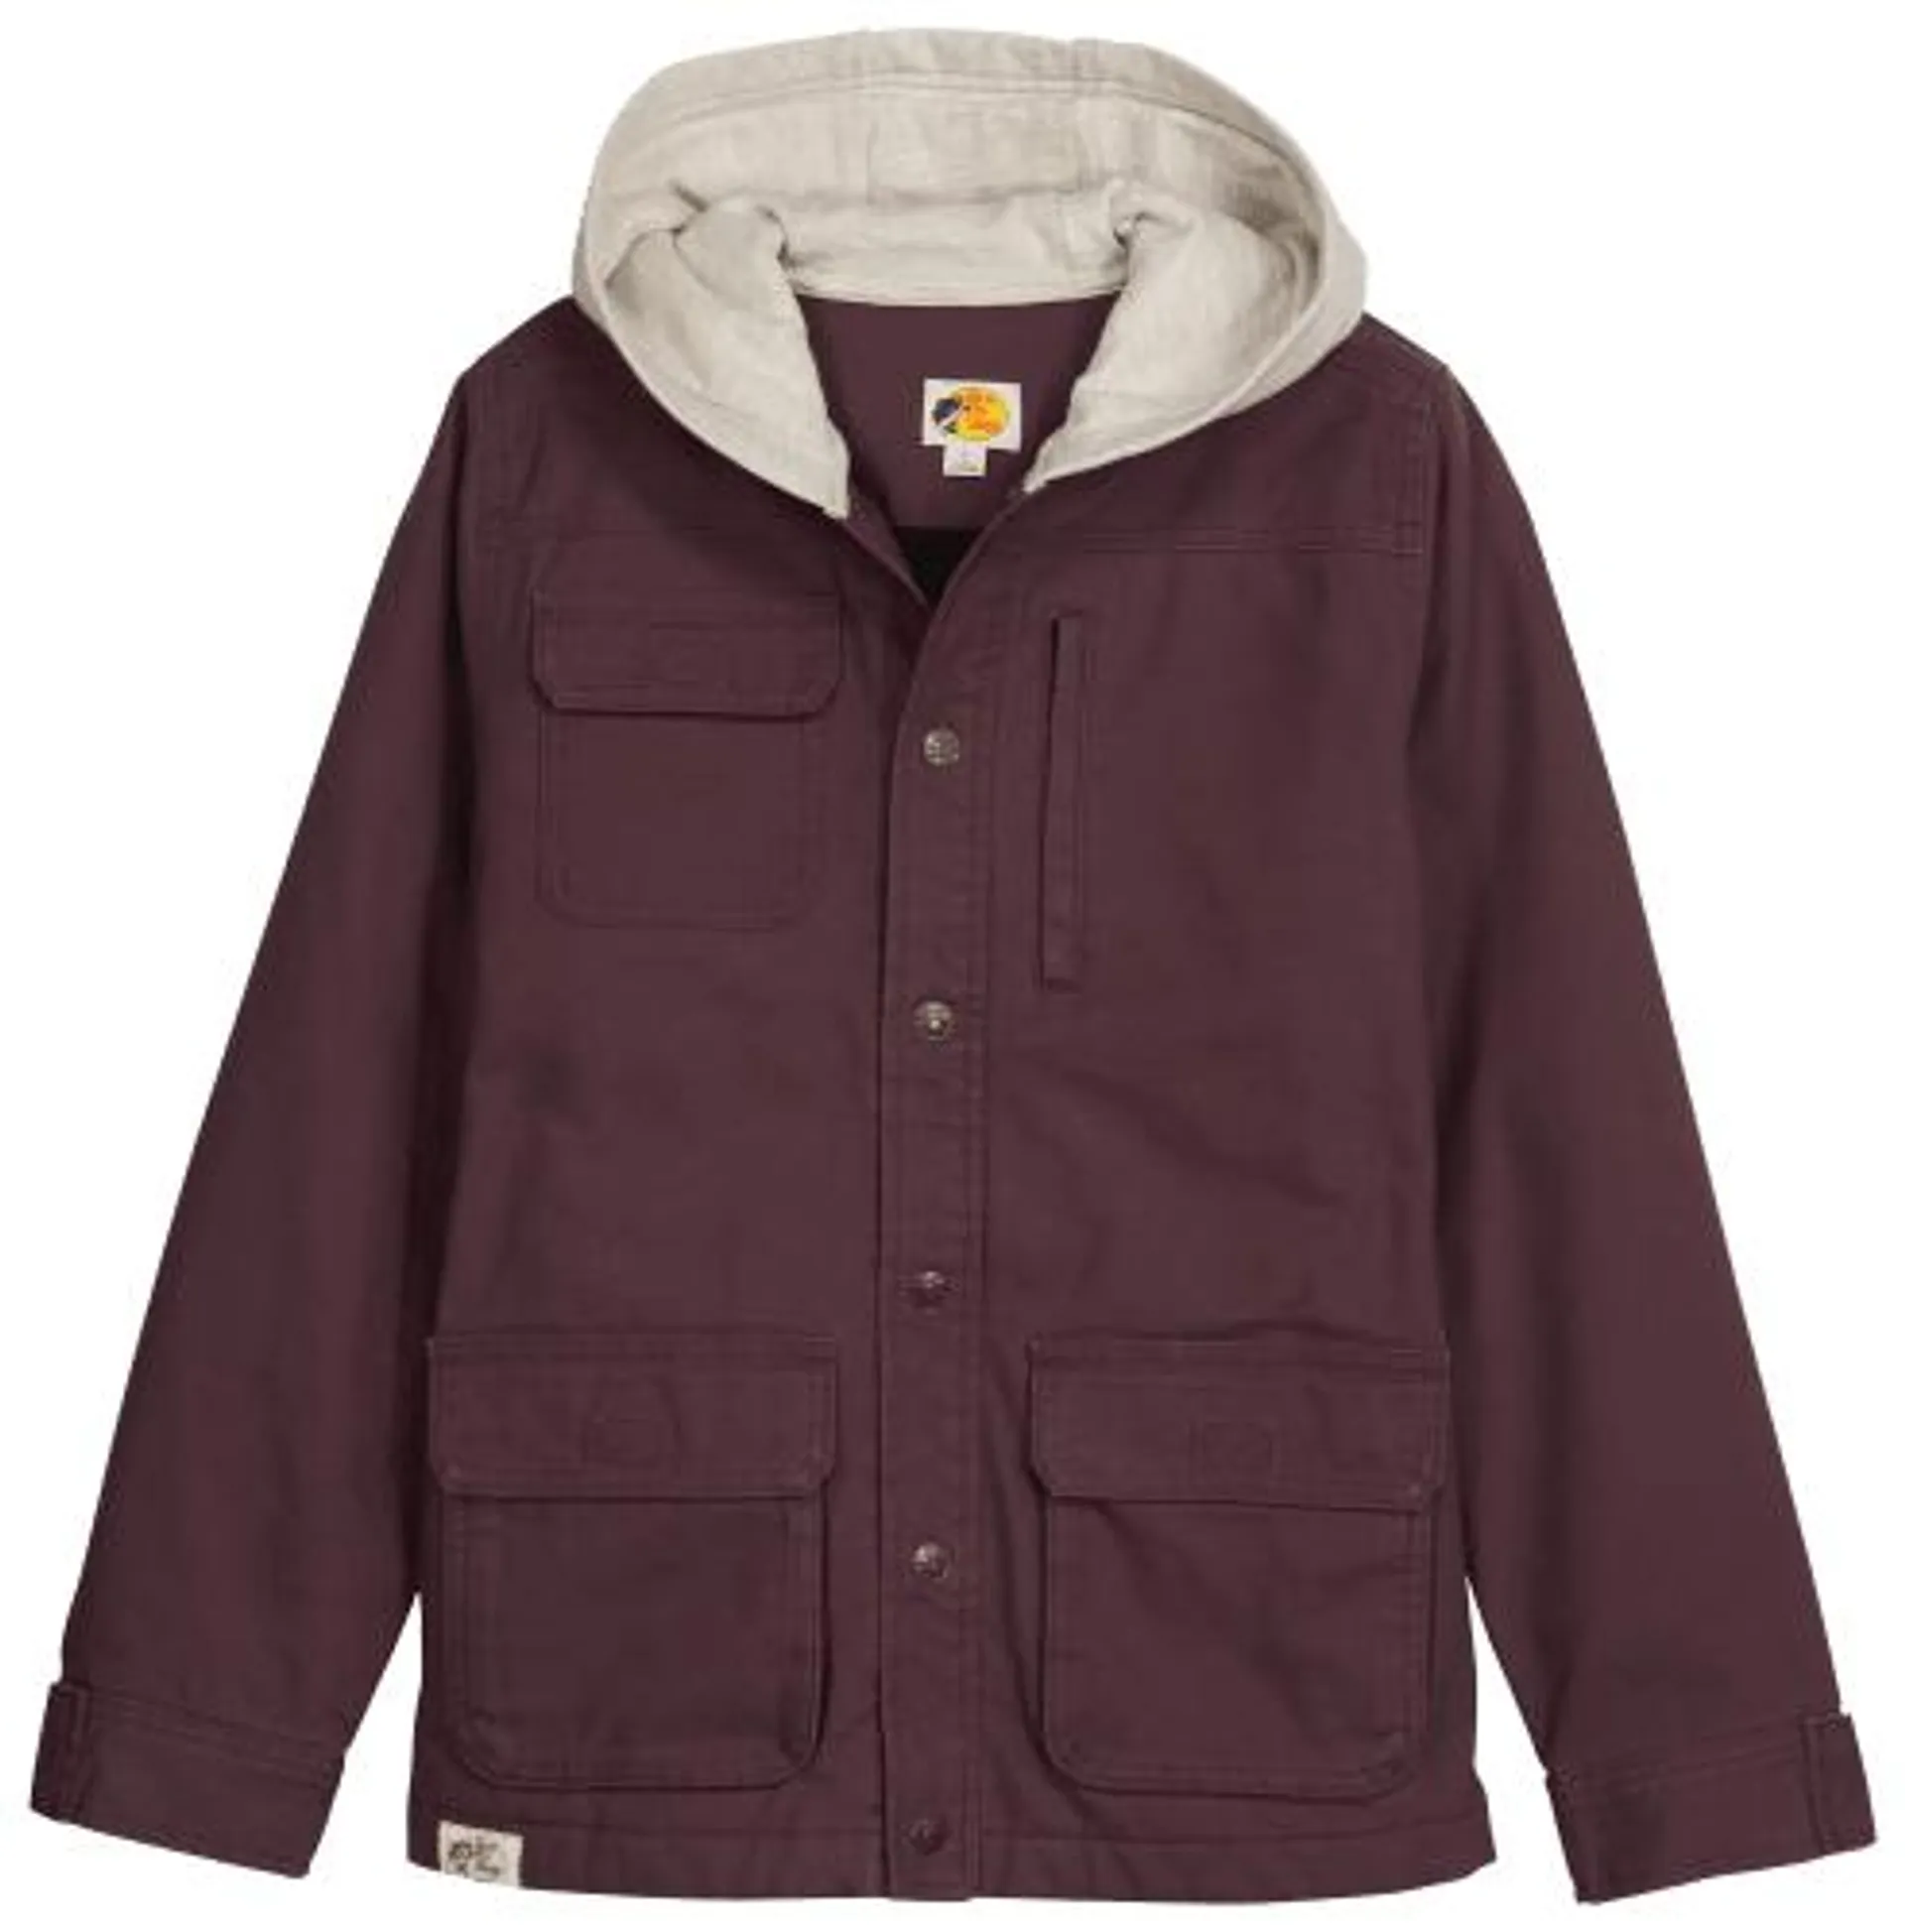 Bass Pro Shops Snap-Front Hooded Work Jacket for Kids